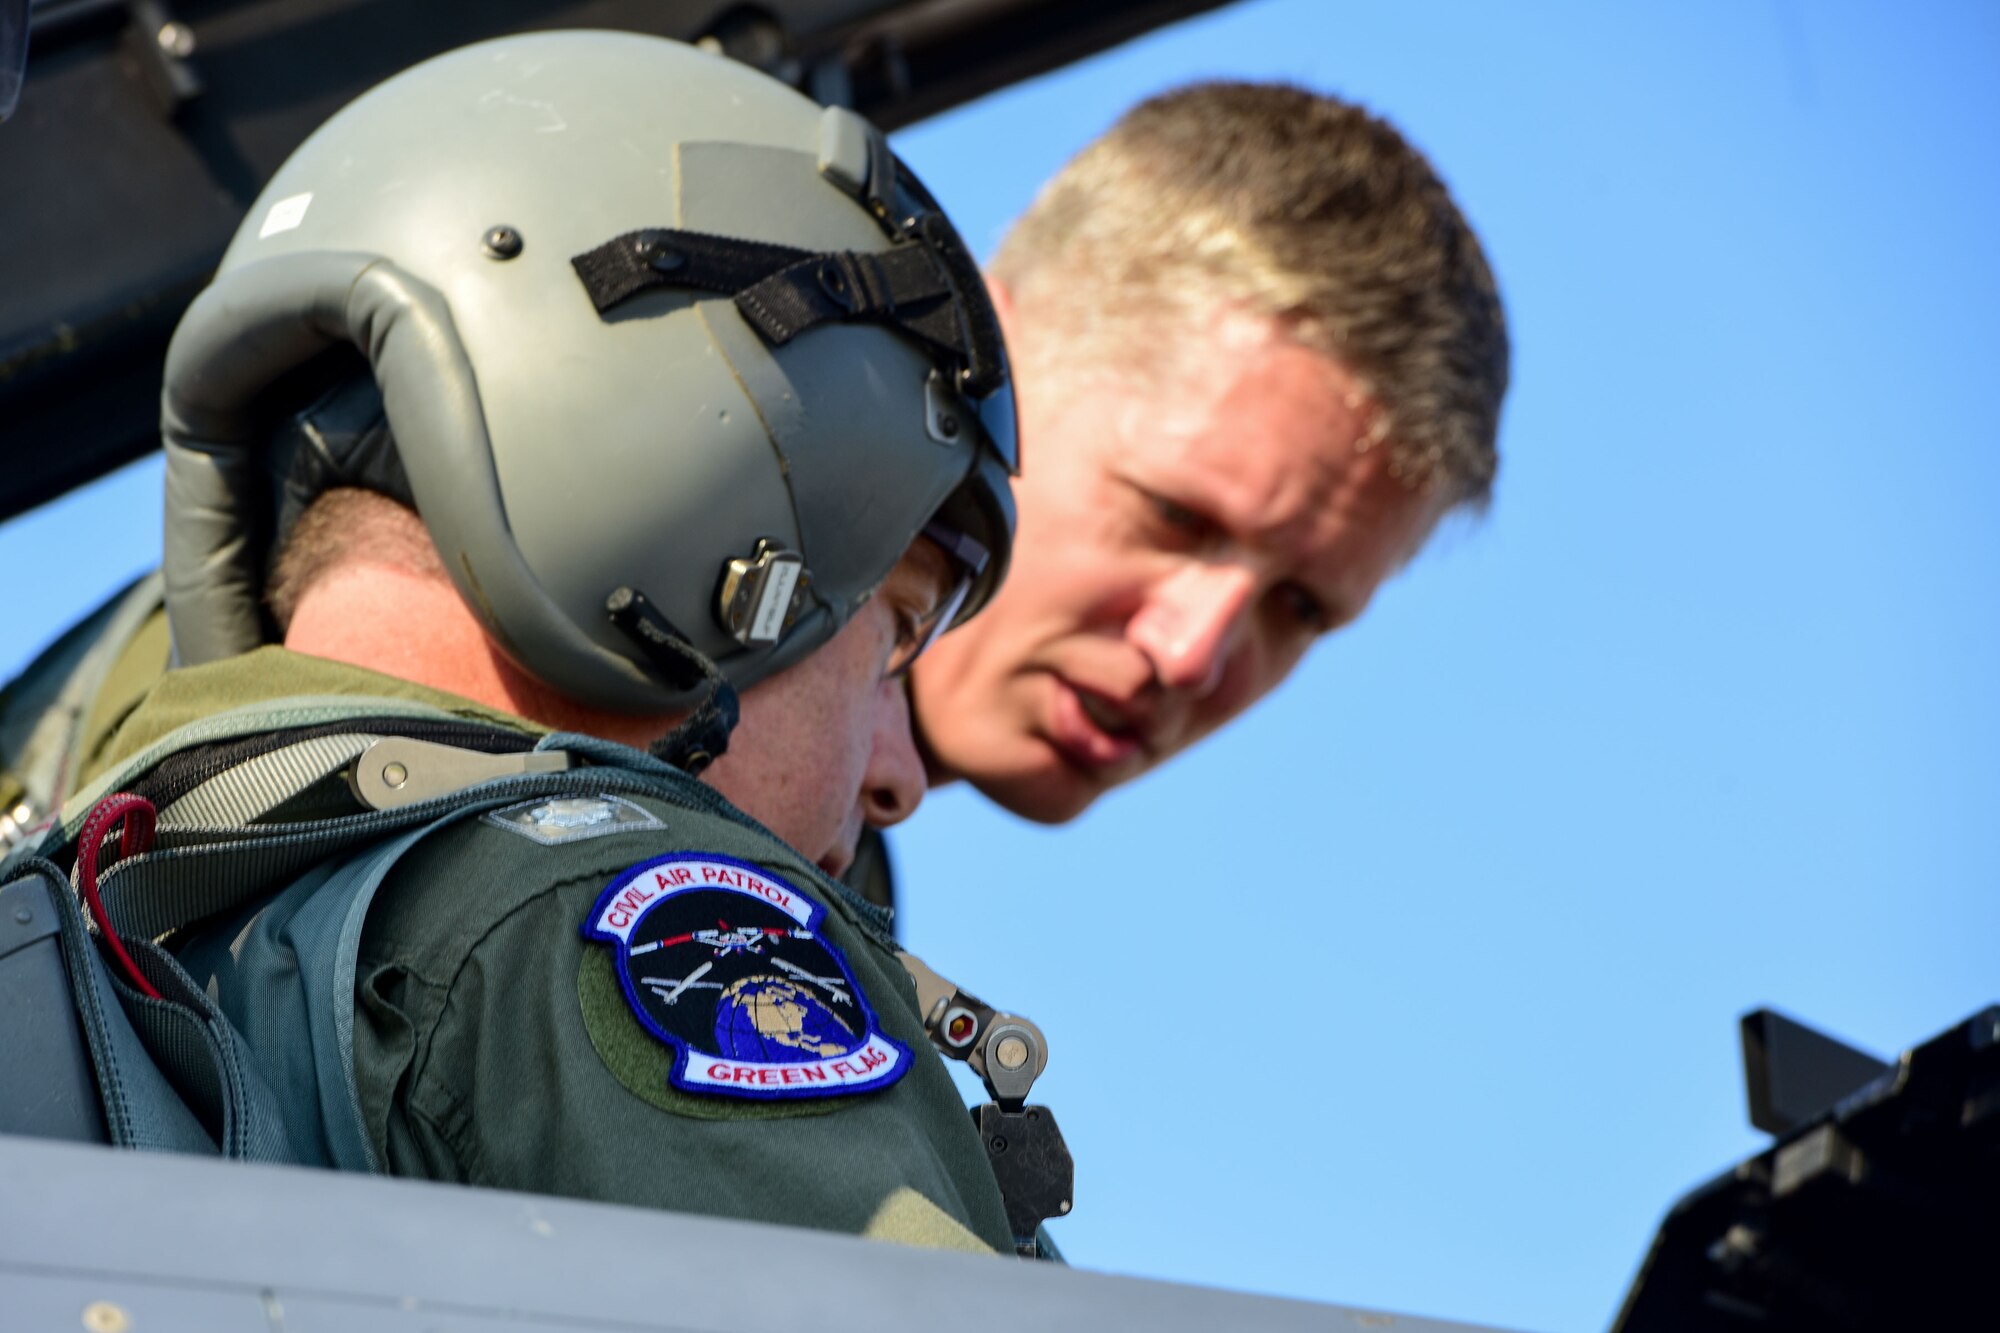 Maj. David Way, F-16 pilot with the 169th Fighter Wing, South Carolina Air National Guard, briefs U.S. Civil Air Patrol Lt. Col. Brett Grooms, the legislative commander of the Civil Air Patrol's South Carolina Wing, prior to an aerospace control alert familiarization flight in an F-16 Fighting Falcon fighter jet June 11. The 169th FW, in close coordination with the Continental U.S. North American Aerospace Defense Command Region, the Eastern Air Defense Sector and the Federal Aviation Administration had recently hosted a Southeast Aerospace Control Alert June 5-7 but weather delays precluded Grooms from flying during the actual SACA event. The conference was a total team training initiative to improve homeland defense capabilities by developing techniques with joint forces during small-scale exercises. This conference consisted of South Carolina Air National Guard 169FW F-16 fighter jets, U.S. Coast Guard Rotary Wing Air Intercept Squadron MH-65D Dolphin helicopters from USCG Air Station Atlantic City and South Carolina Wing Civil Air Patrol aircraft and crews to hone their skills with tactical-level air-intercept procedures. (U.S. Air National Guard photo by Senior Airman Megan Floyd)